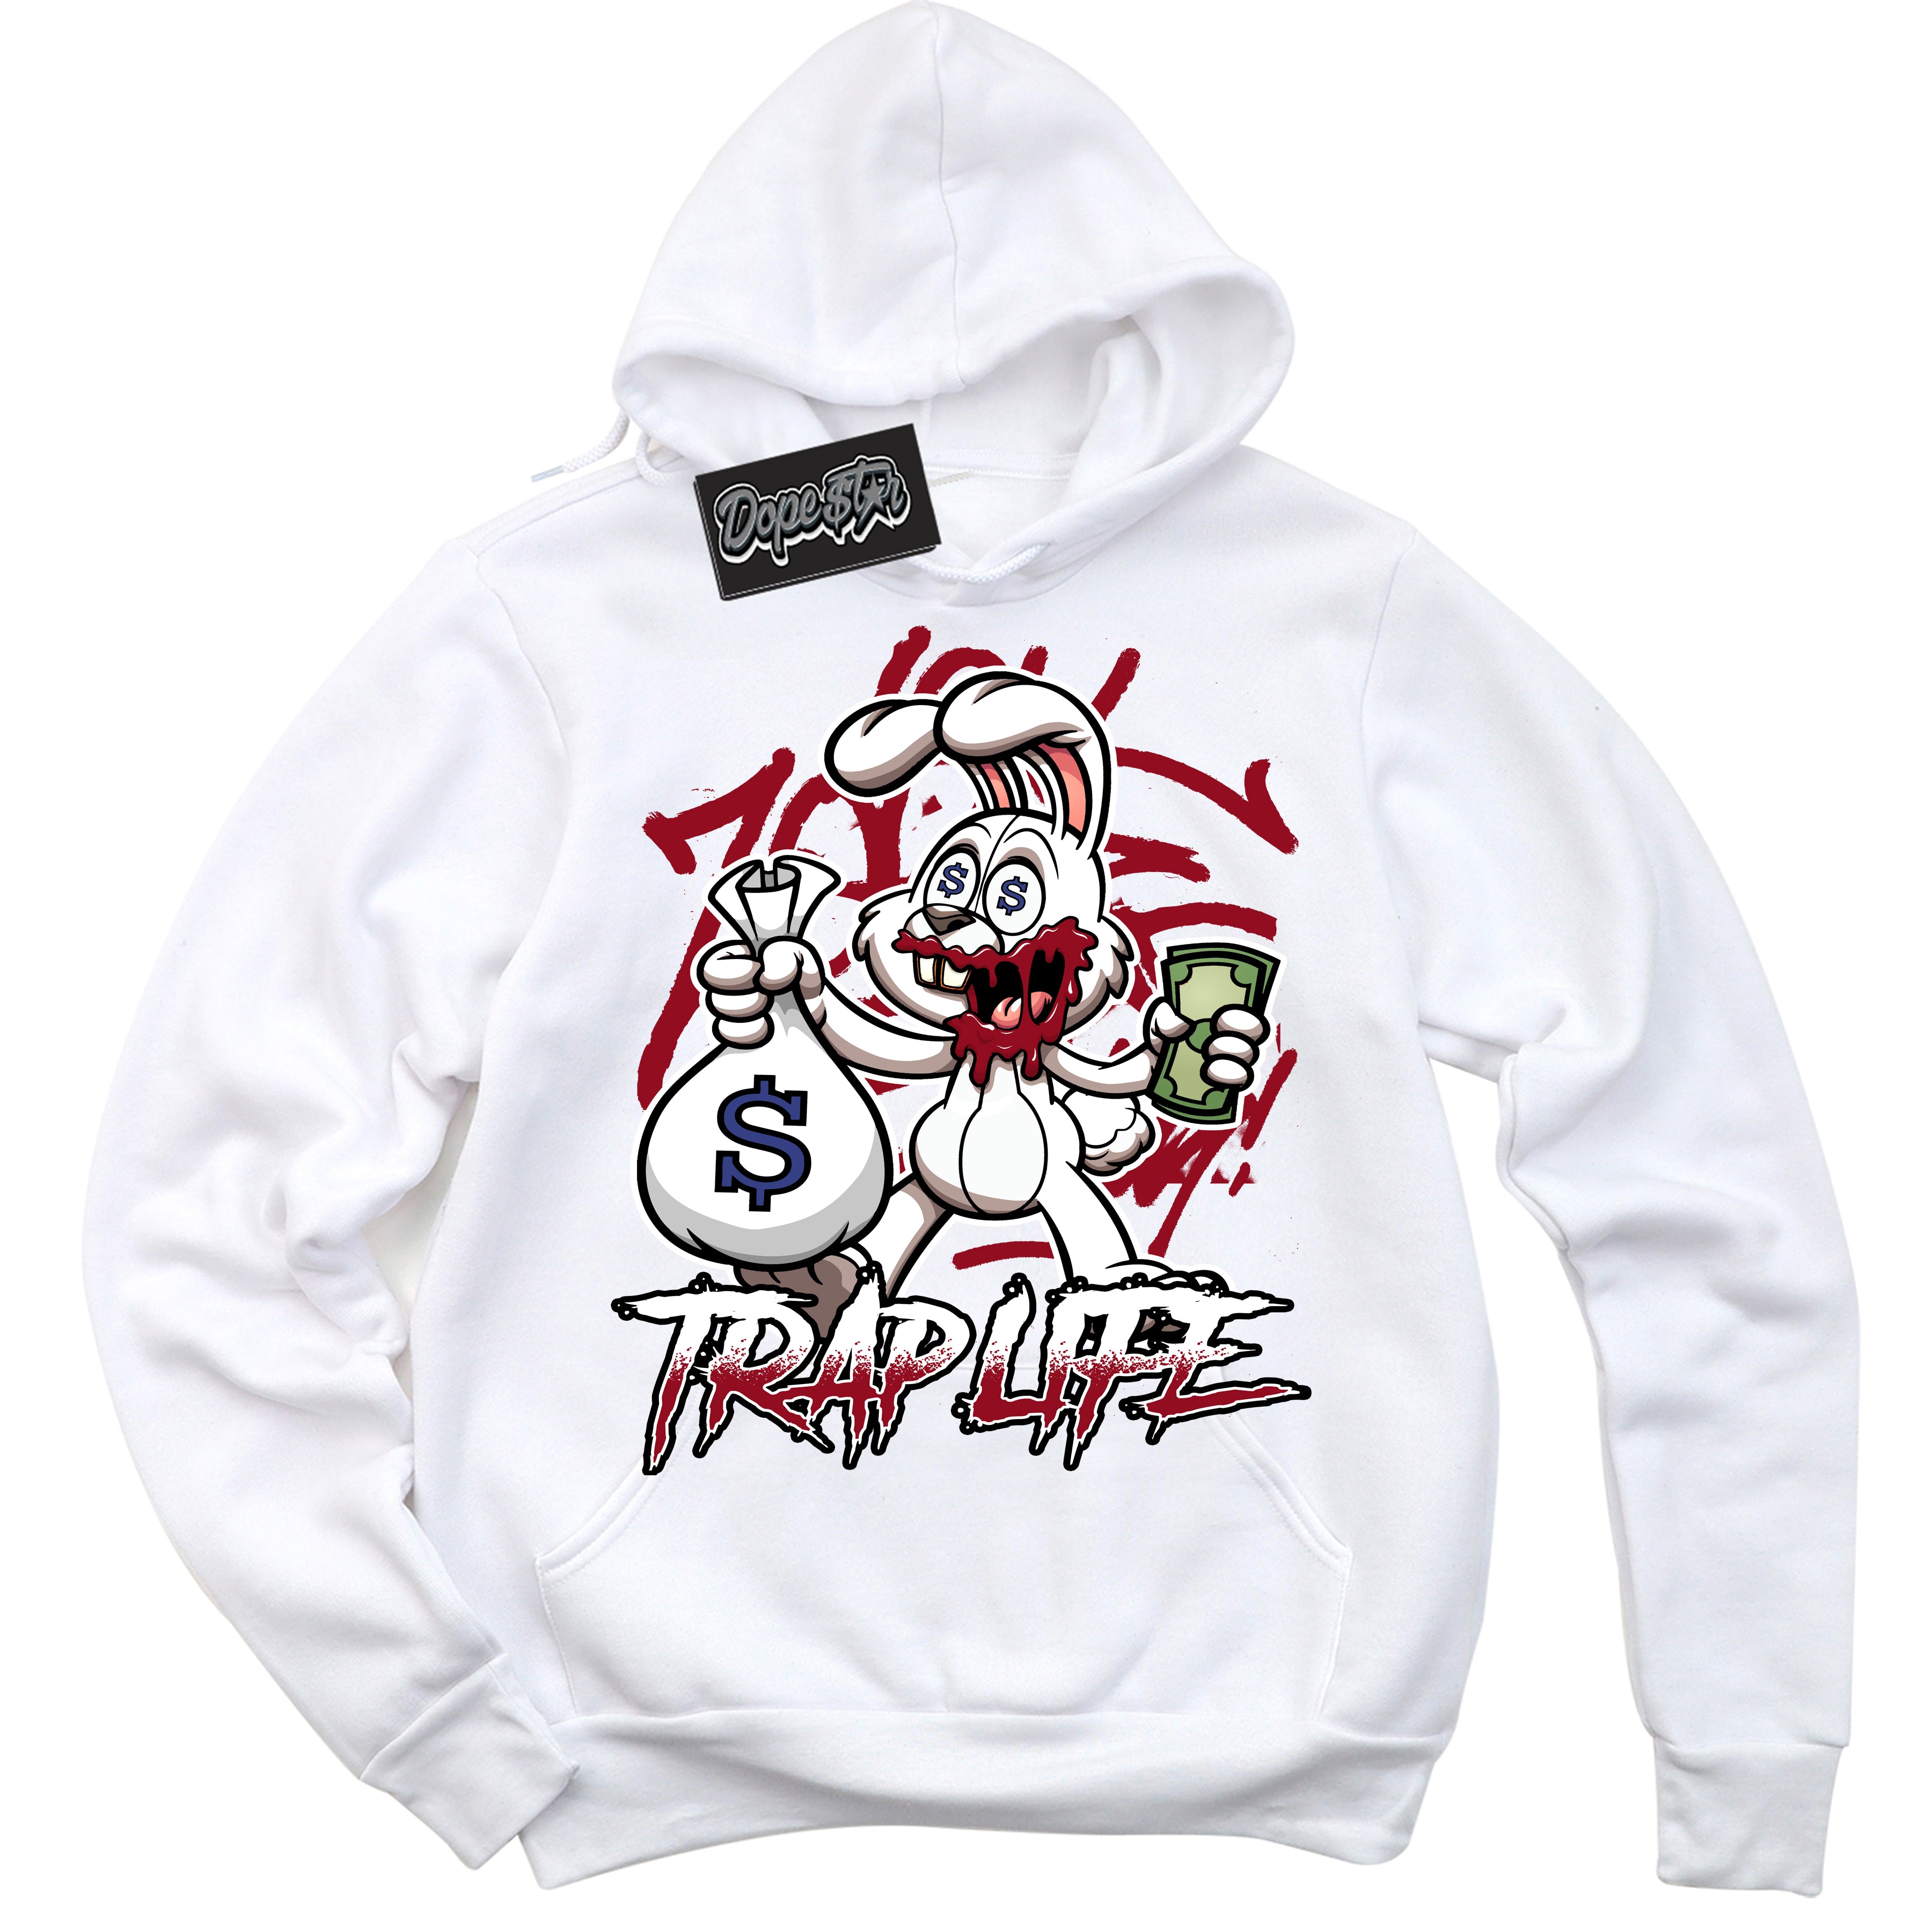 Cool White Hoodie with “ Trap Rabbit ”  design that Perfectly Matches Playoffs 8s Sneakers.